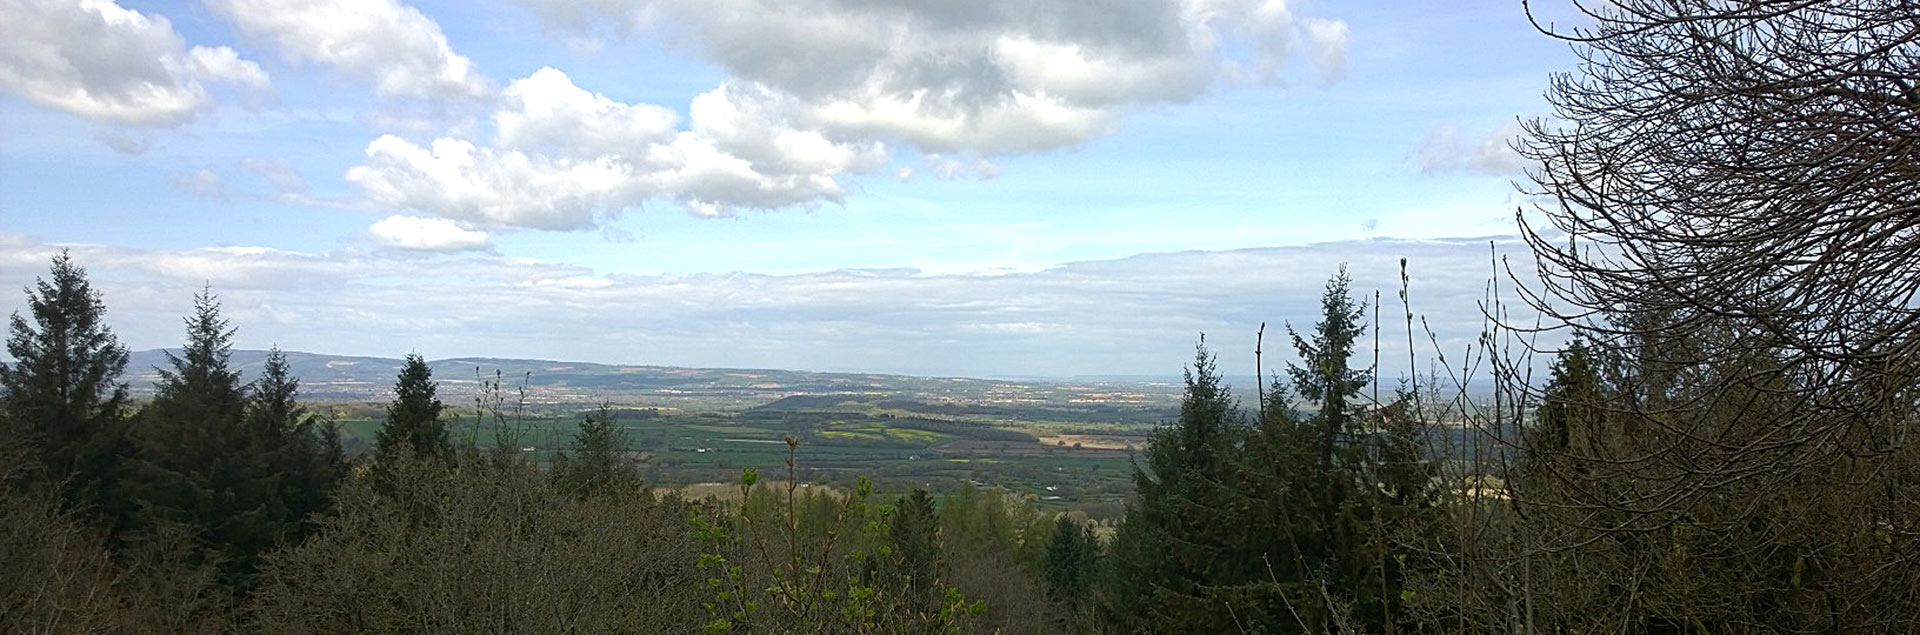 Things to do in the Blackdown Hills